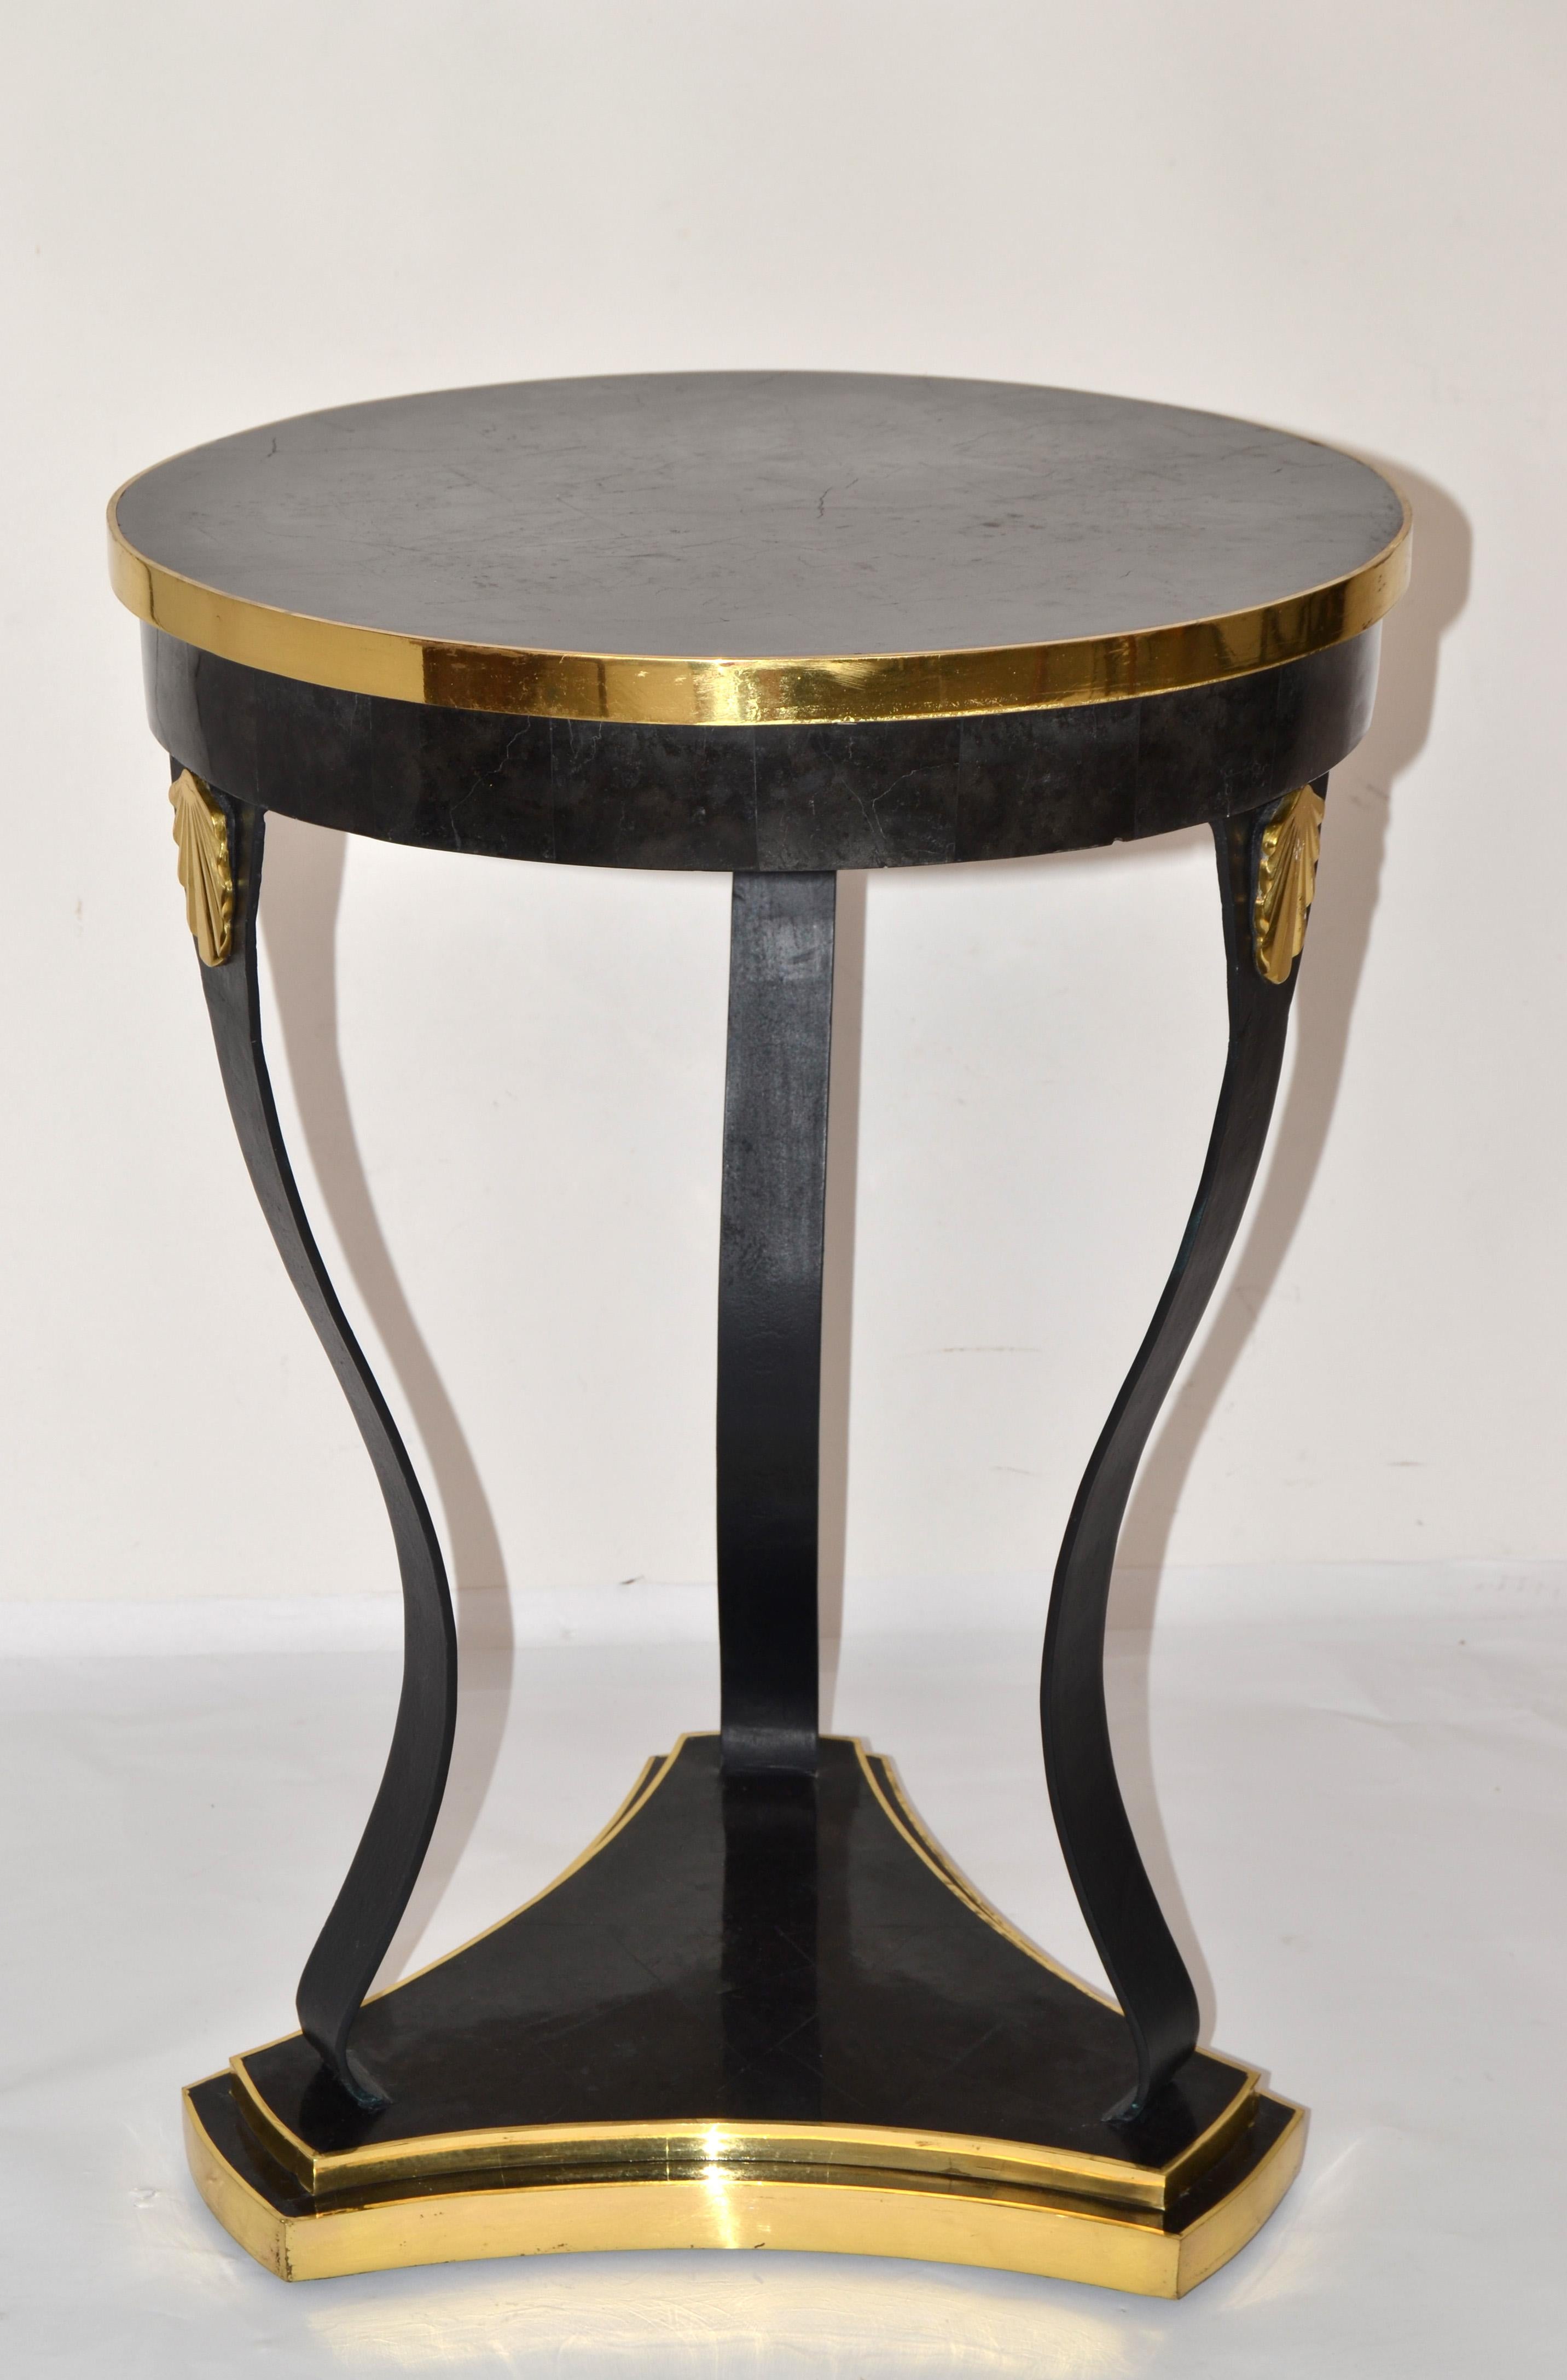 Great Maitland-Smith round Nautical or Coastal forged Iron, Bronze and Black Marble Stone Drink or Accent side table.
The top is Marble Stone with white grain pattern in a stunning manner.
The tripod stem is handmade forged iron supported by a